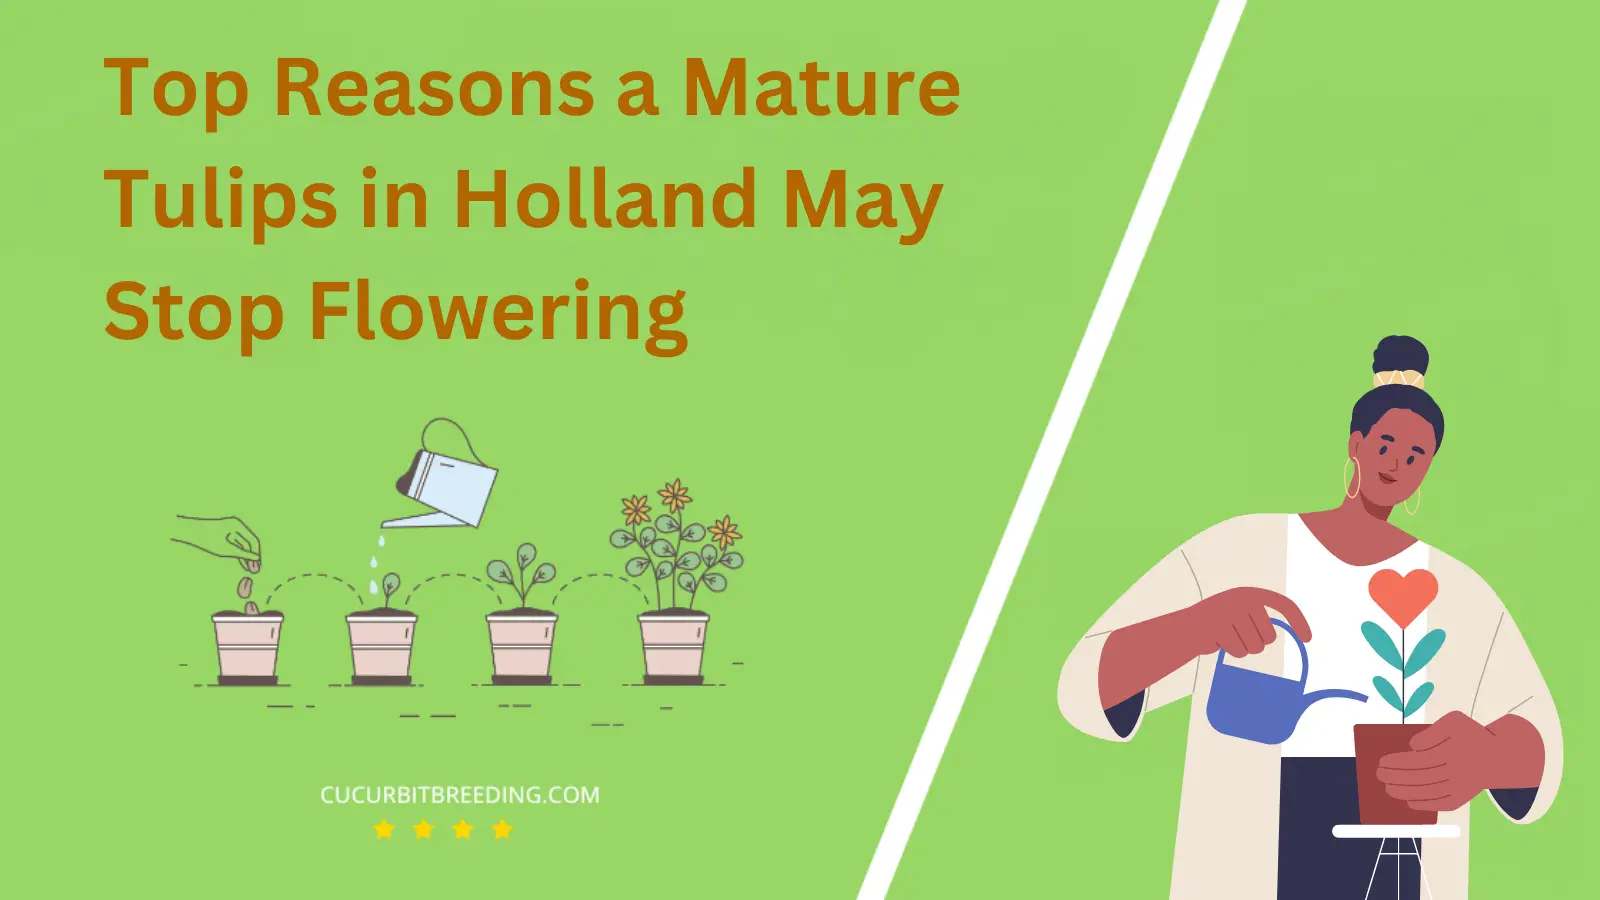 Top Reasons a Mature Tulips in Holland May Stop Flowering